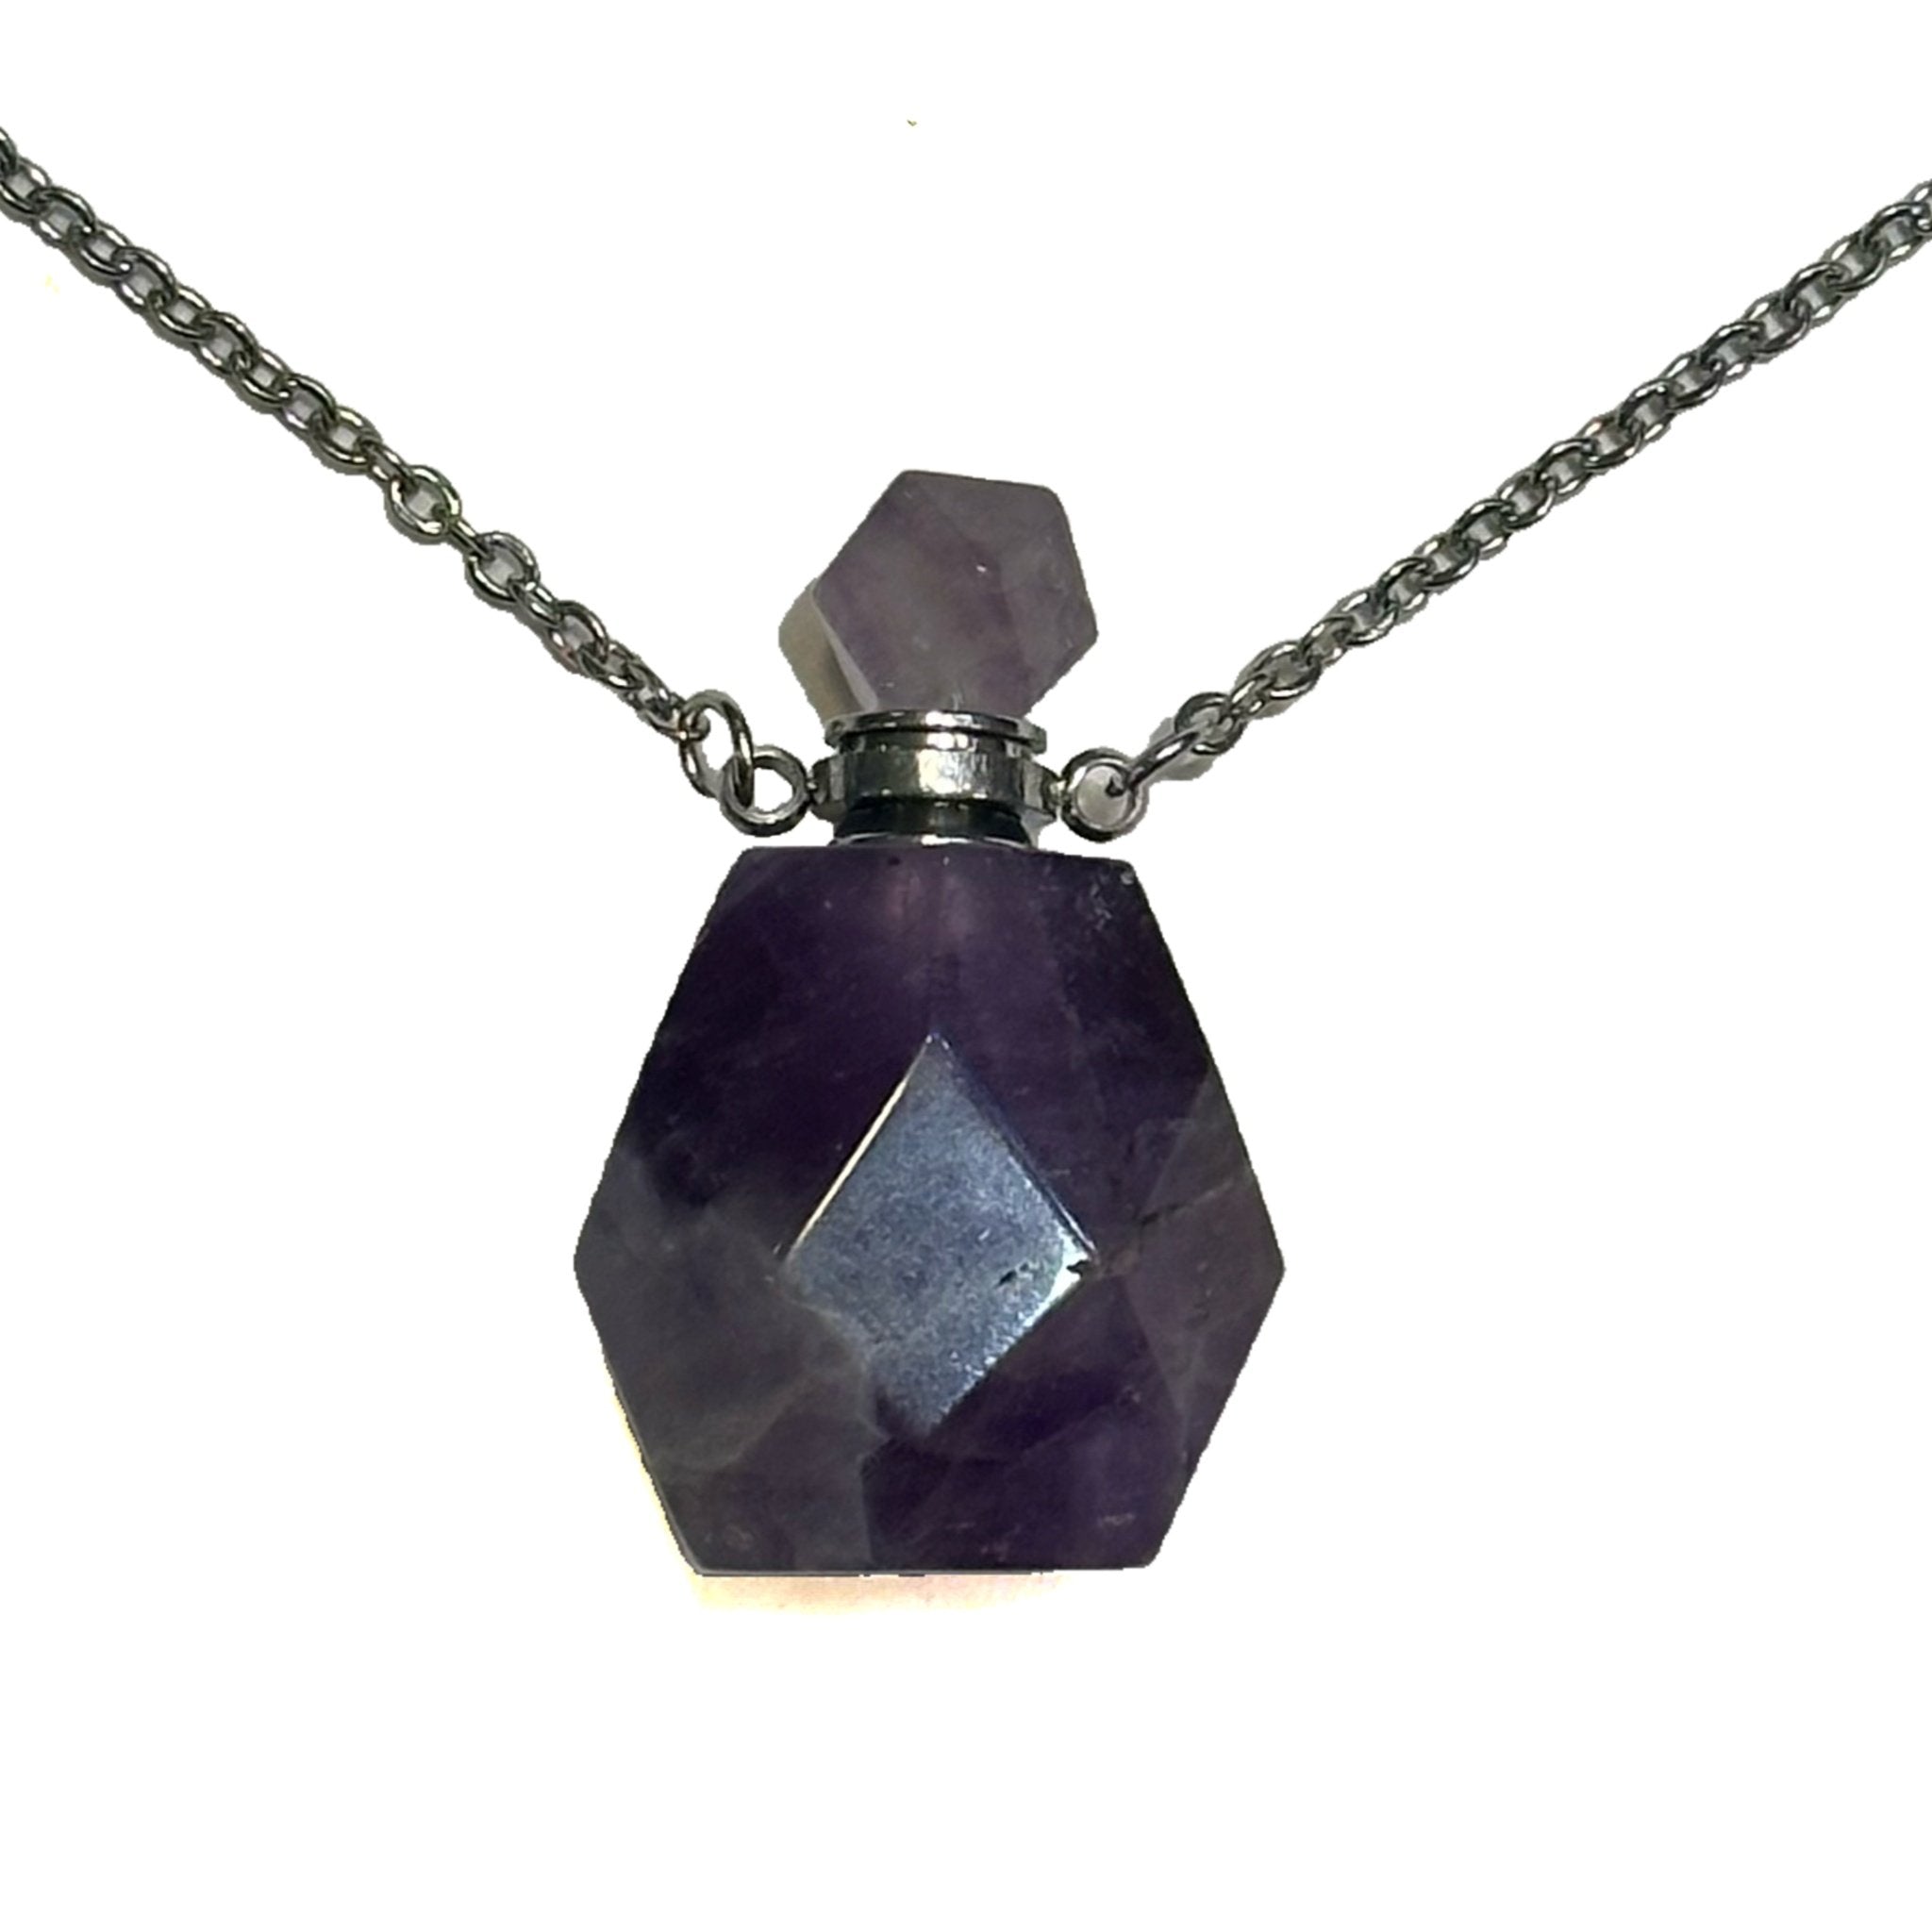 Gemstone Poison Bottle Necklace - Sacred Crystals Chains and Necklaces